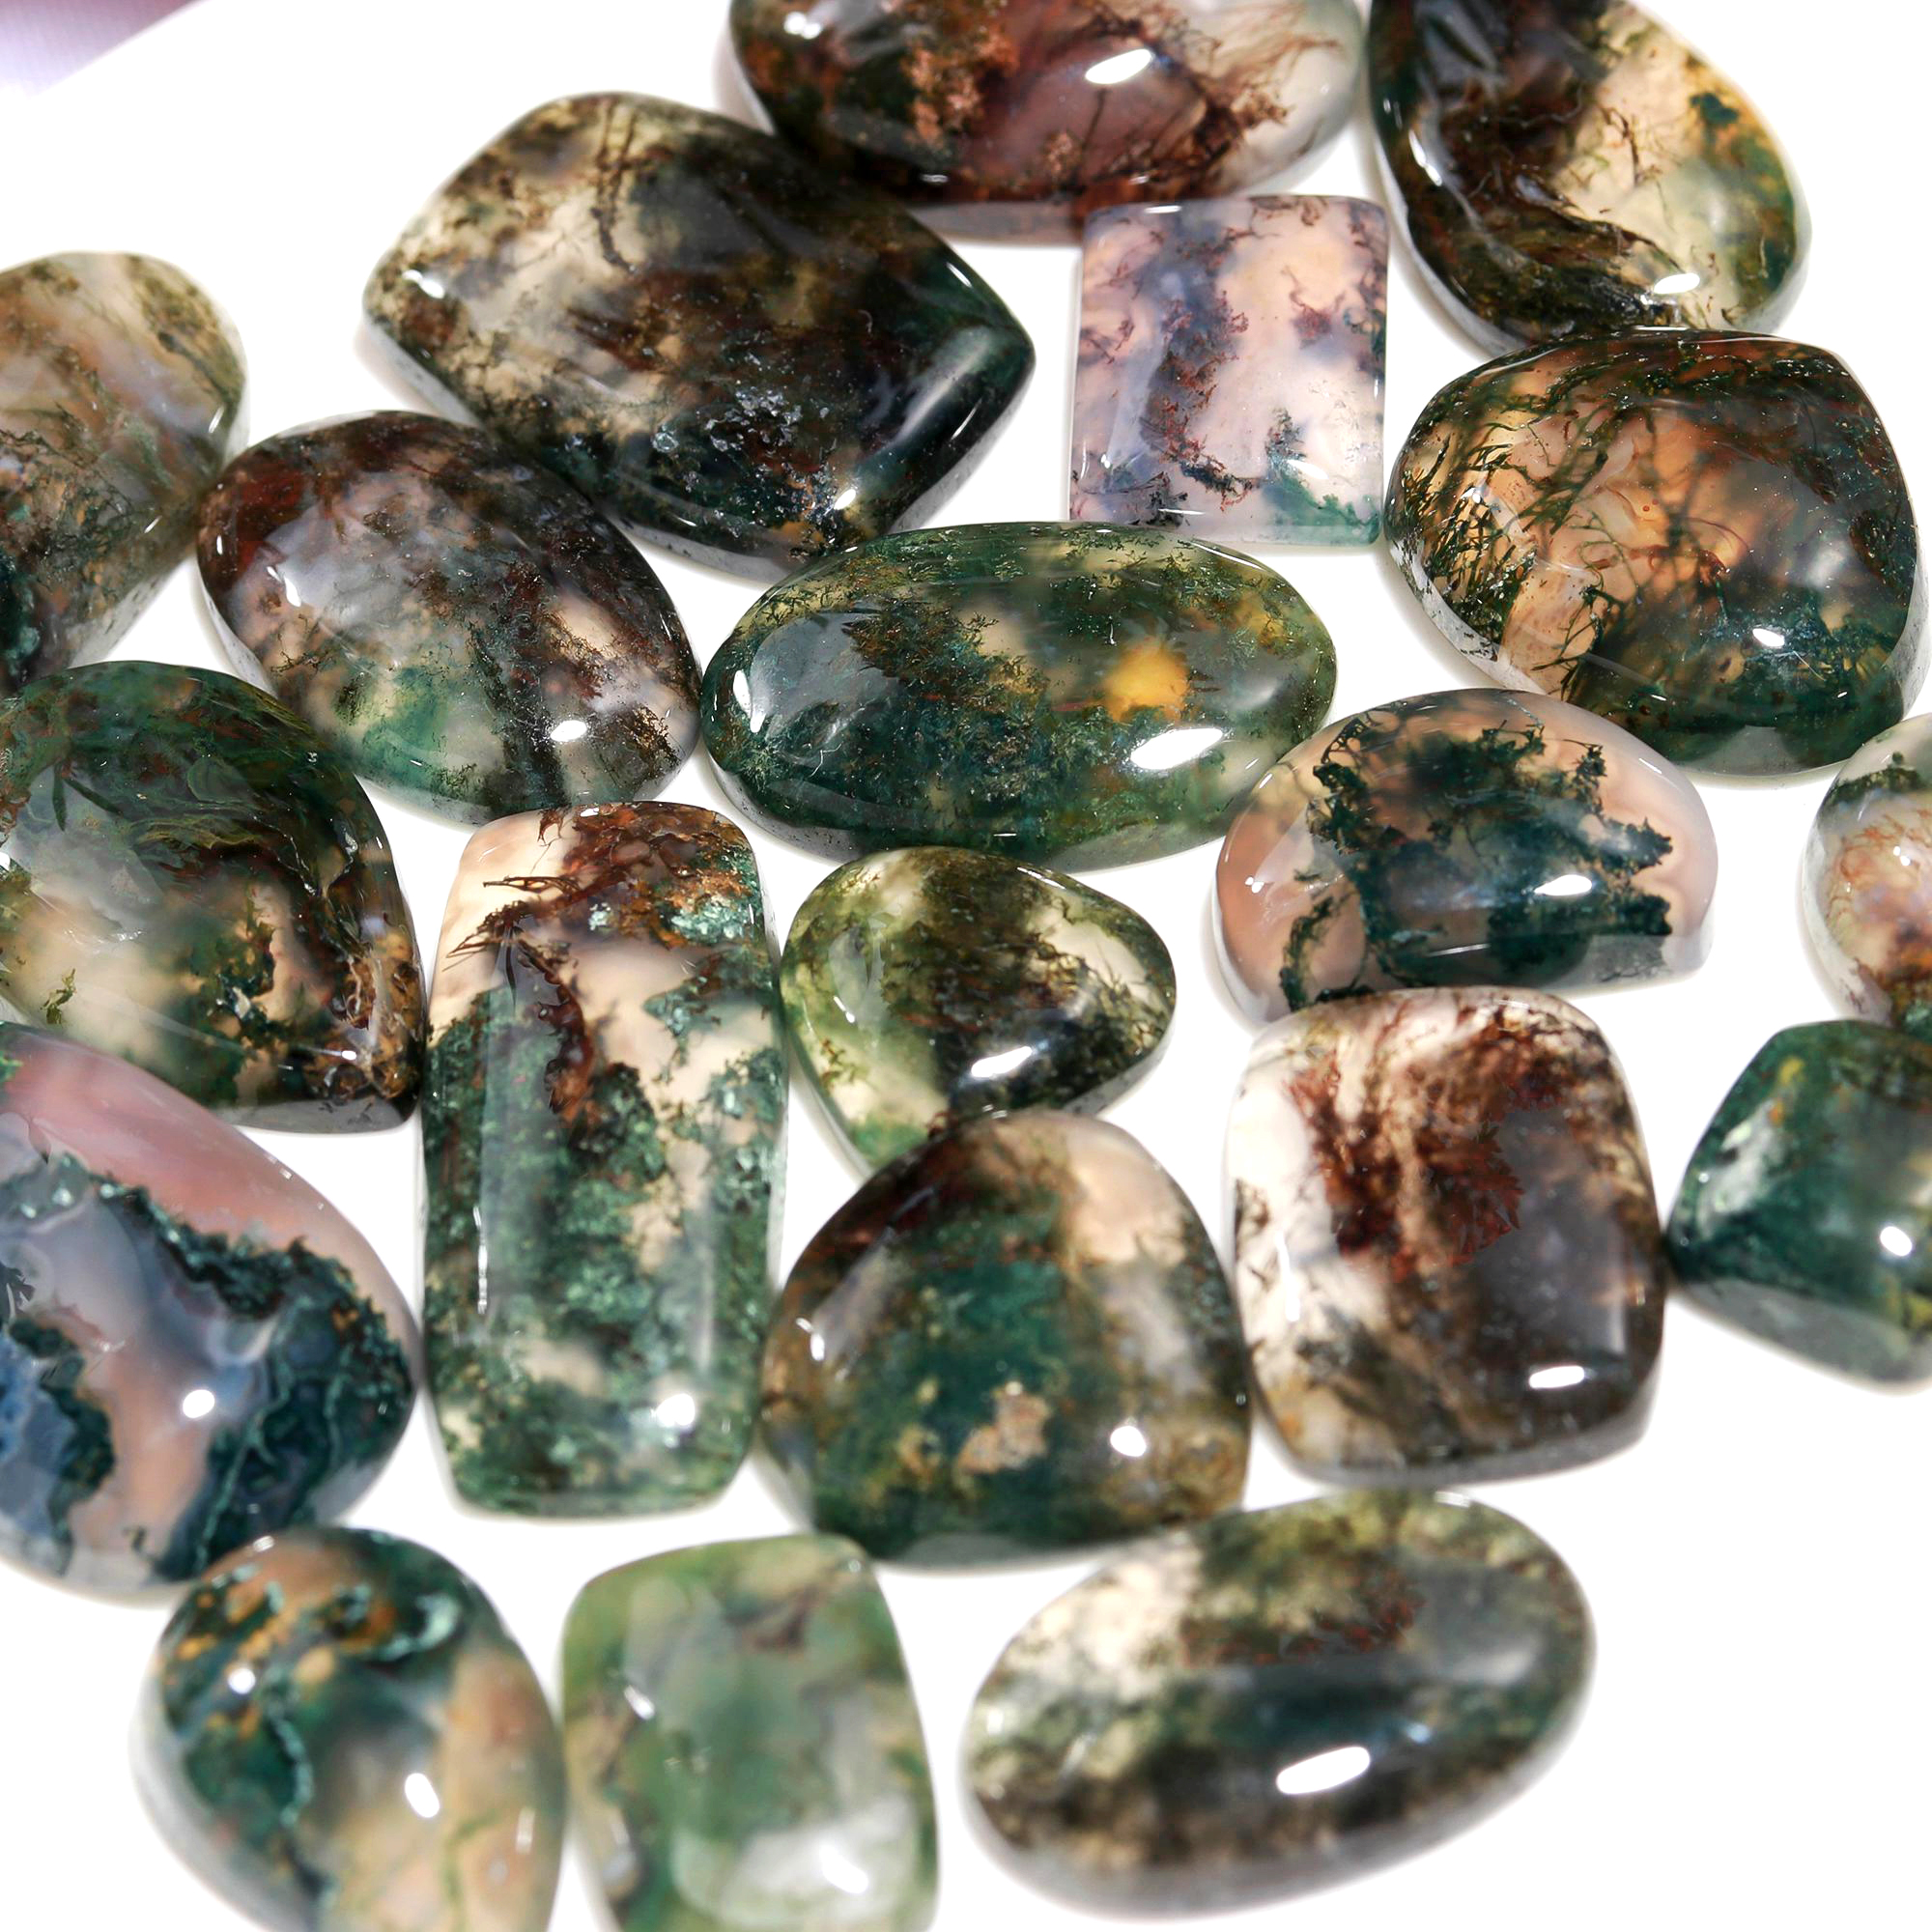 20 Pc 179 Cts Natural Green Moss Agate Mix Loose gemstone cabochon Wholesale lot polished both side Size 21x11 7x7mm